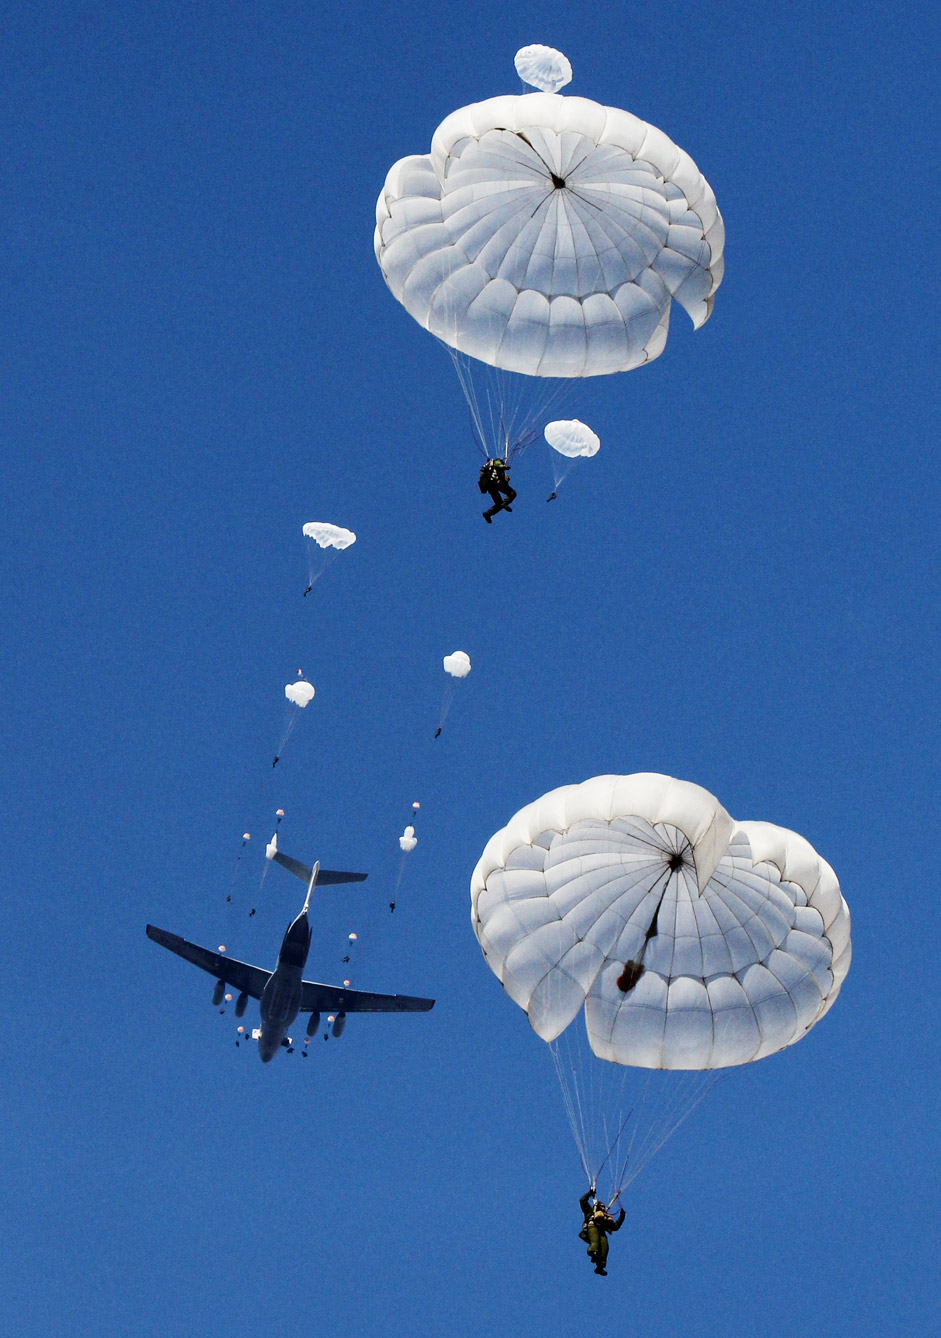 Russian paratroopers during tactical exercises on Sergeev range in Primorsky Territory